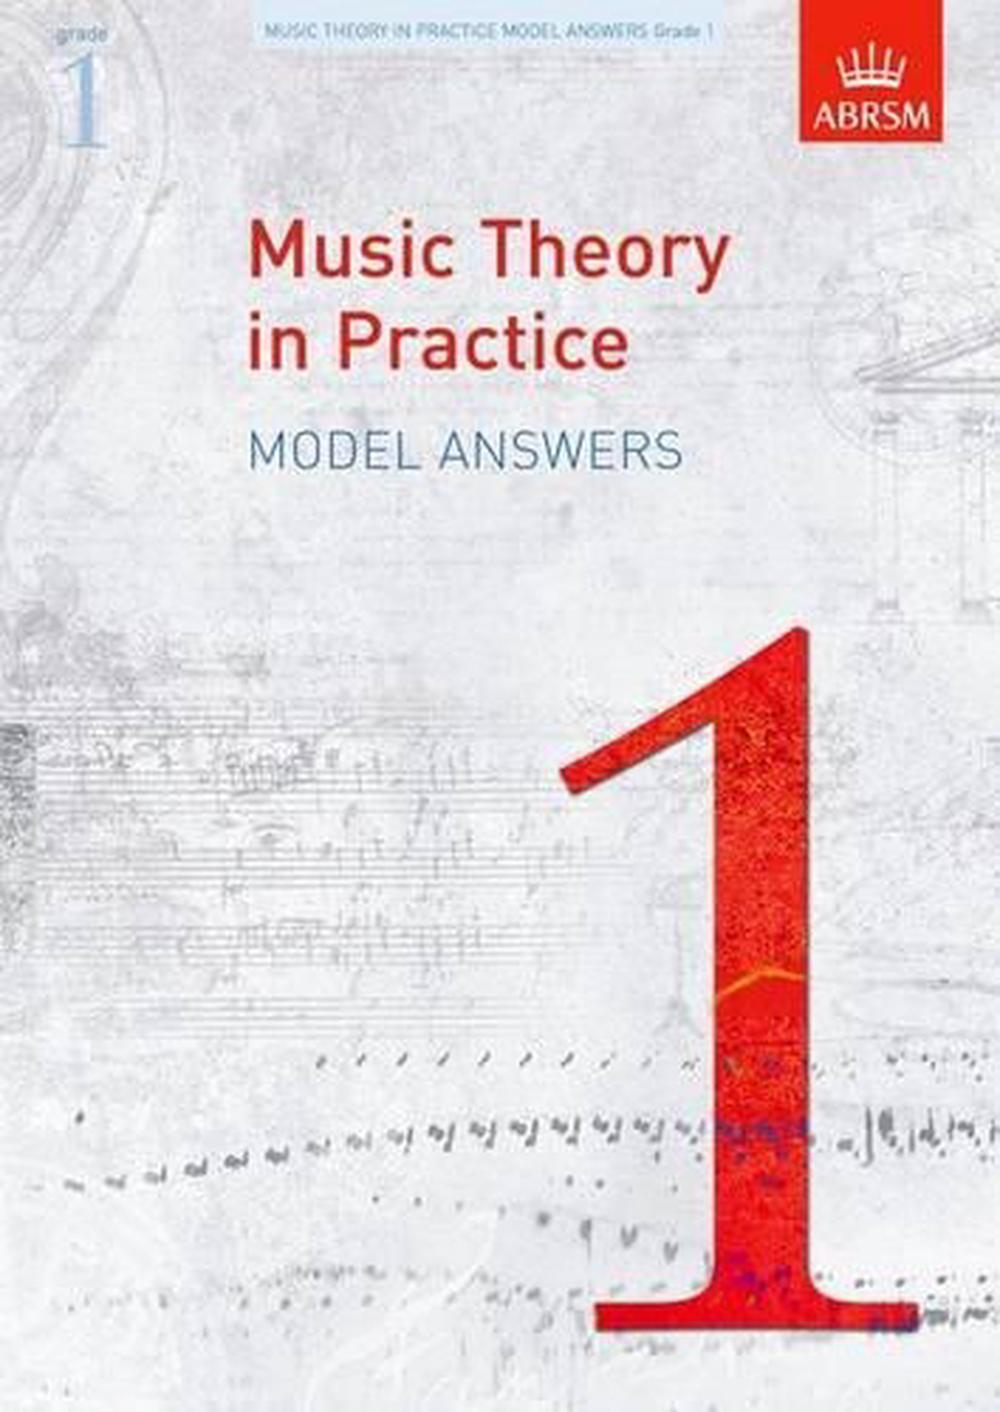 Music Theory in Practice Model Answers, Grade 1 by Abrsm, 9781848491144 Buy online at The Nile